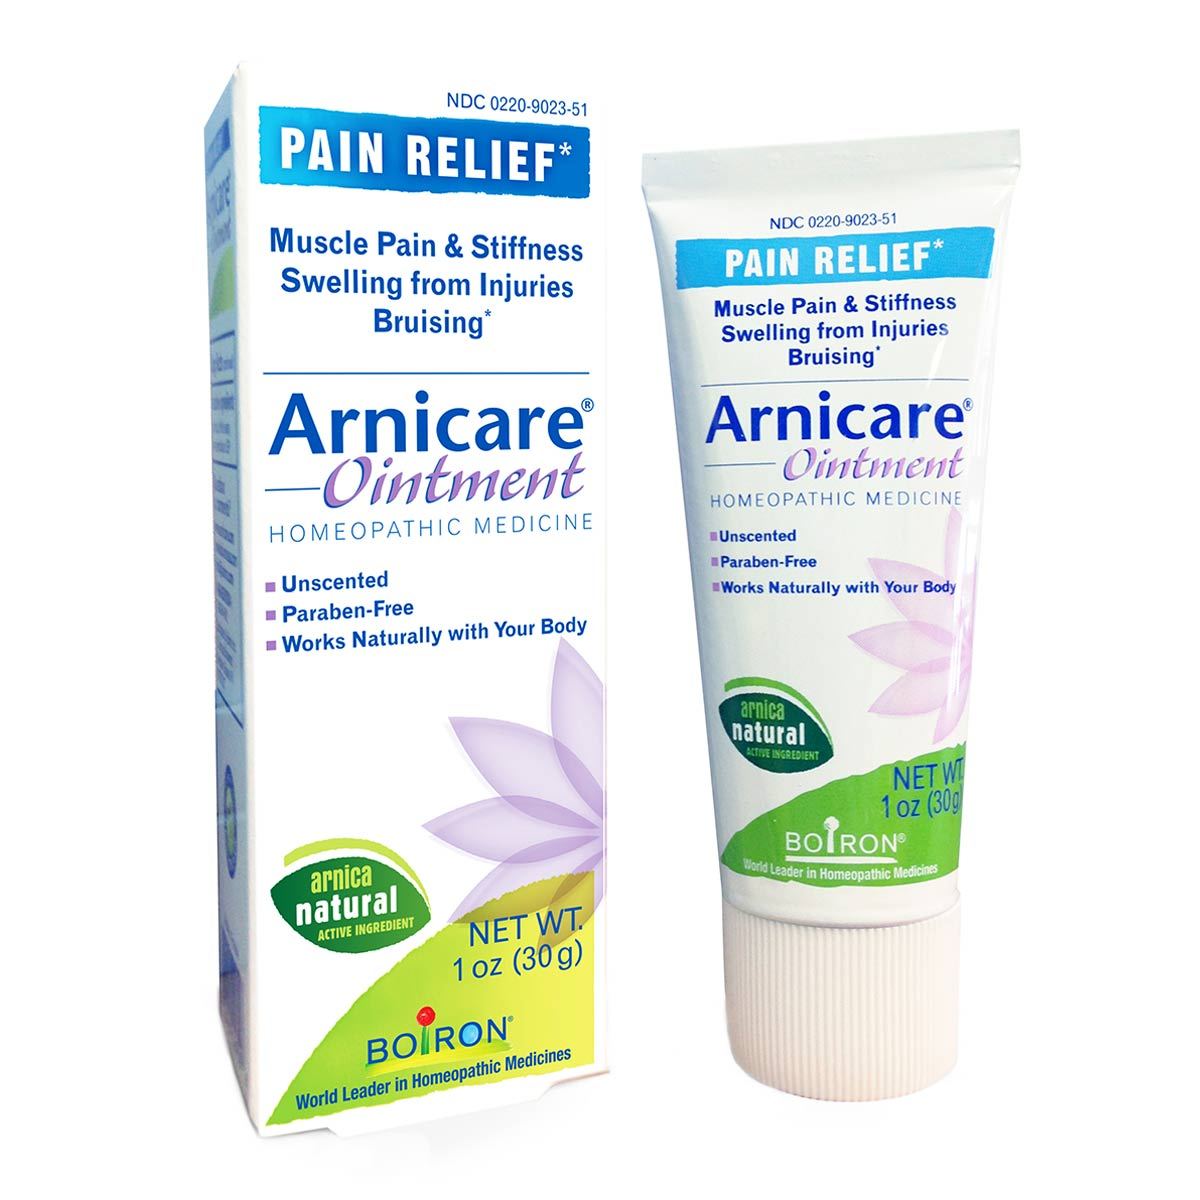 Primary image of Arnica Ointment